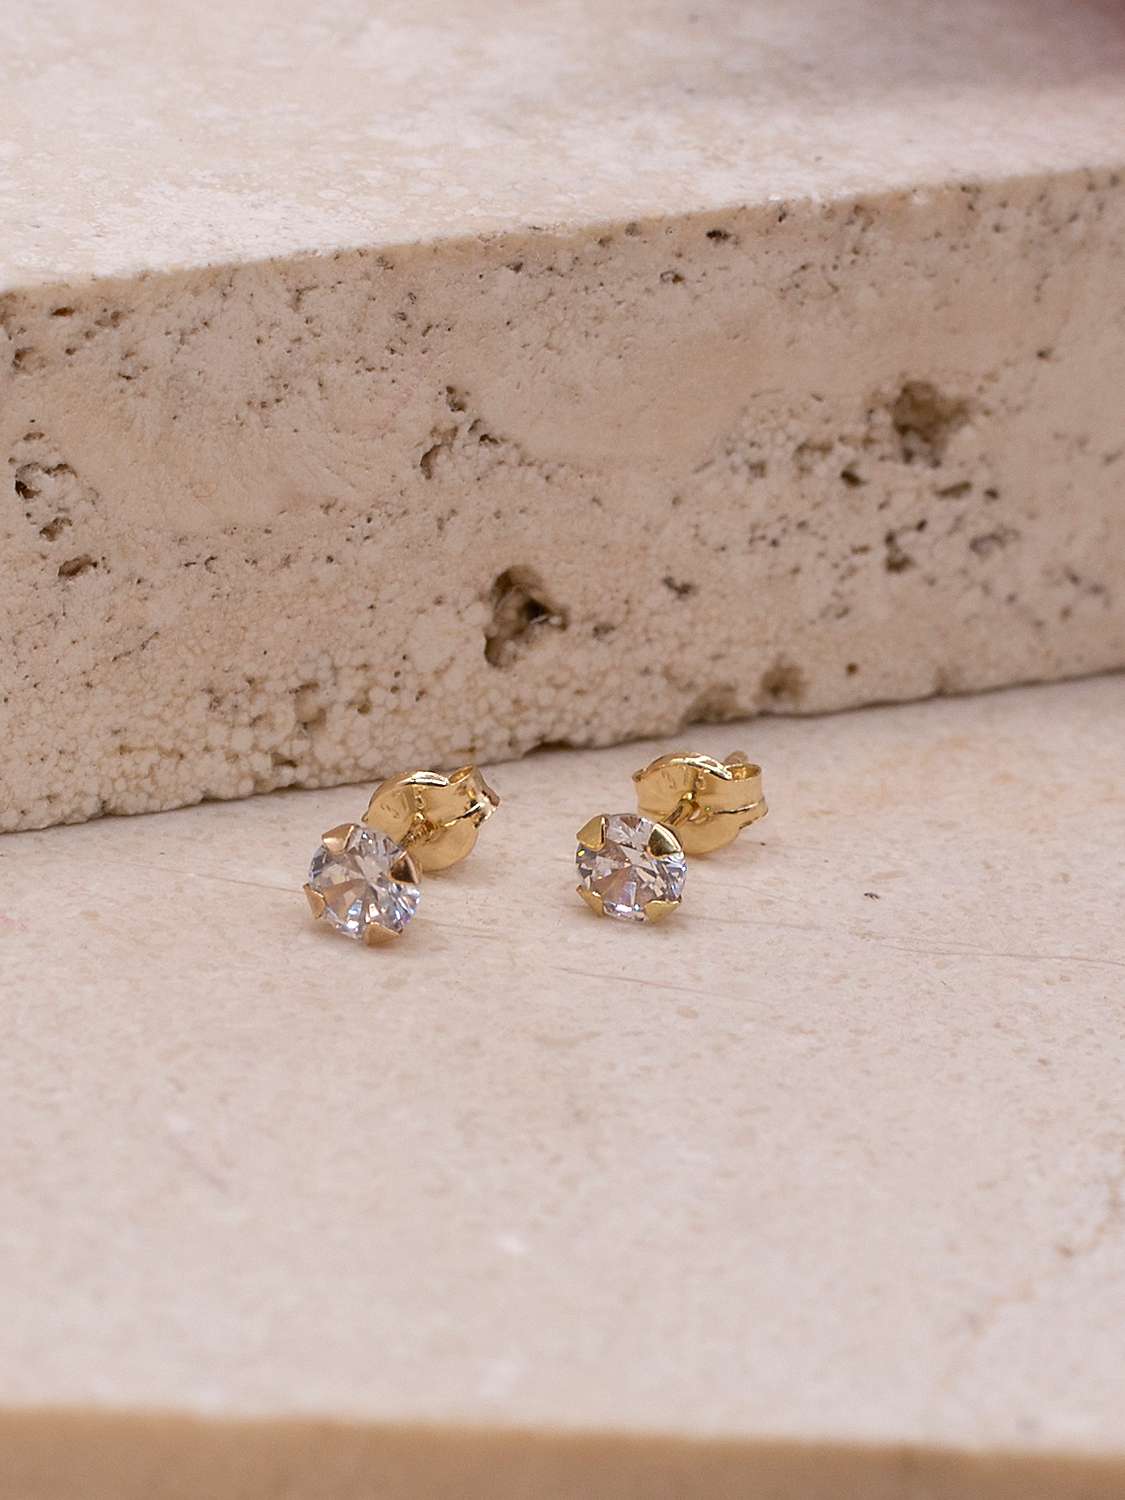 Buy IBB 9ct Yellow Gold Cubic Zirconia Stud Earrings, Yellow Gold Online at johnlewis.com